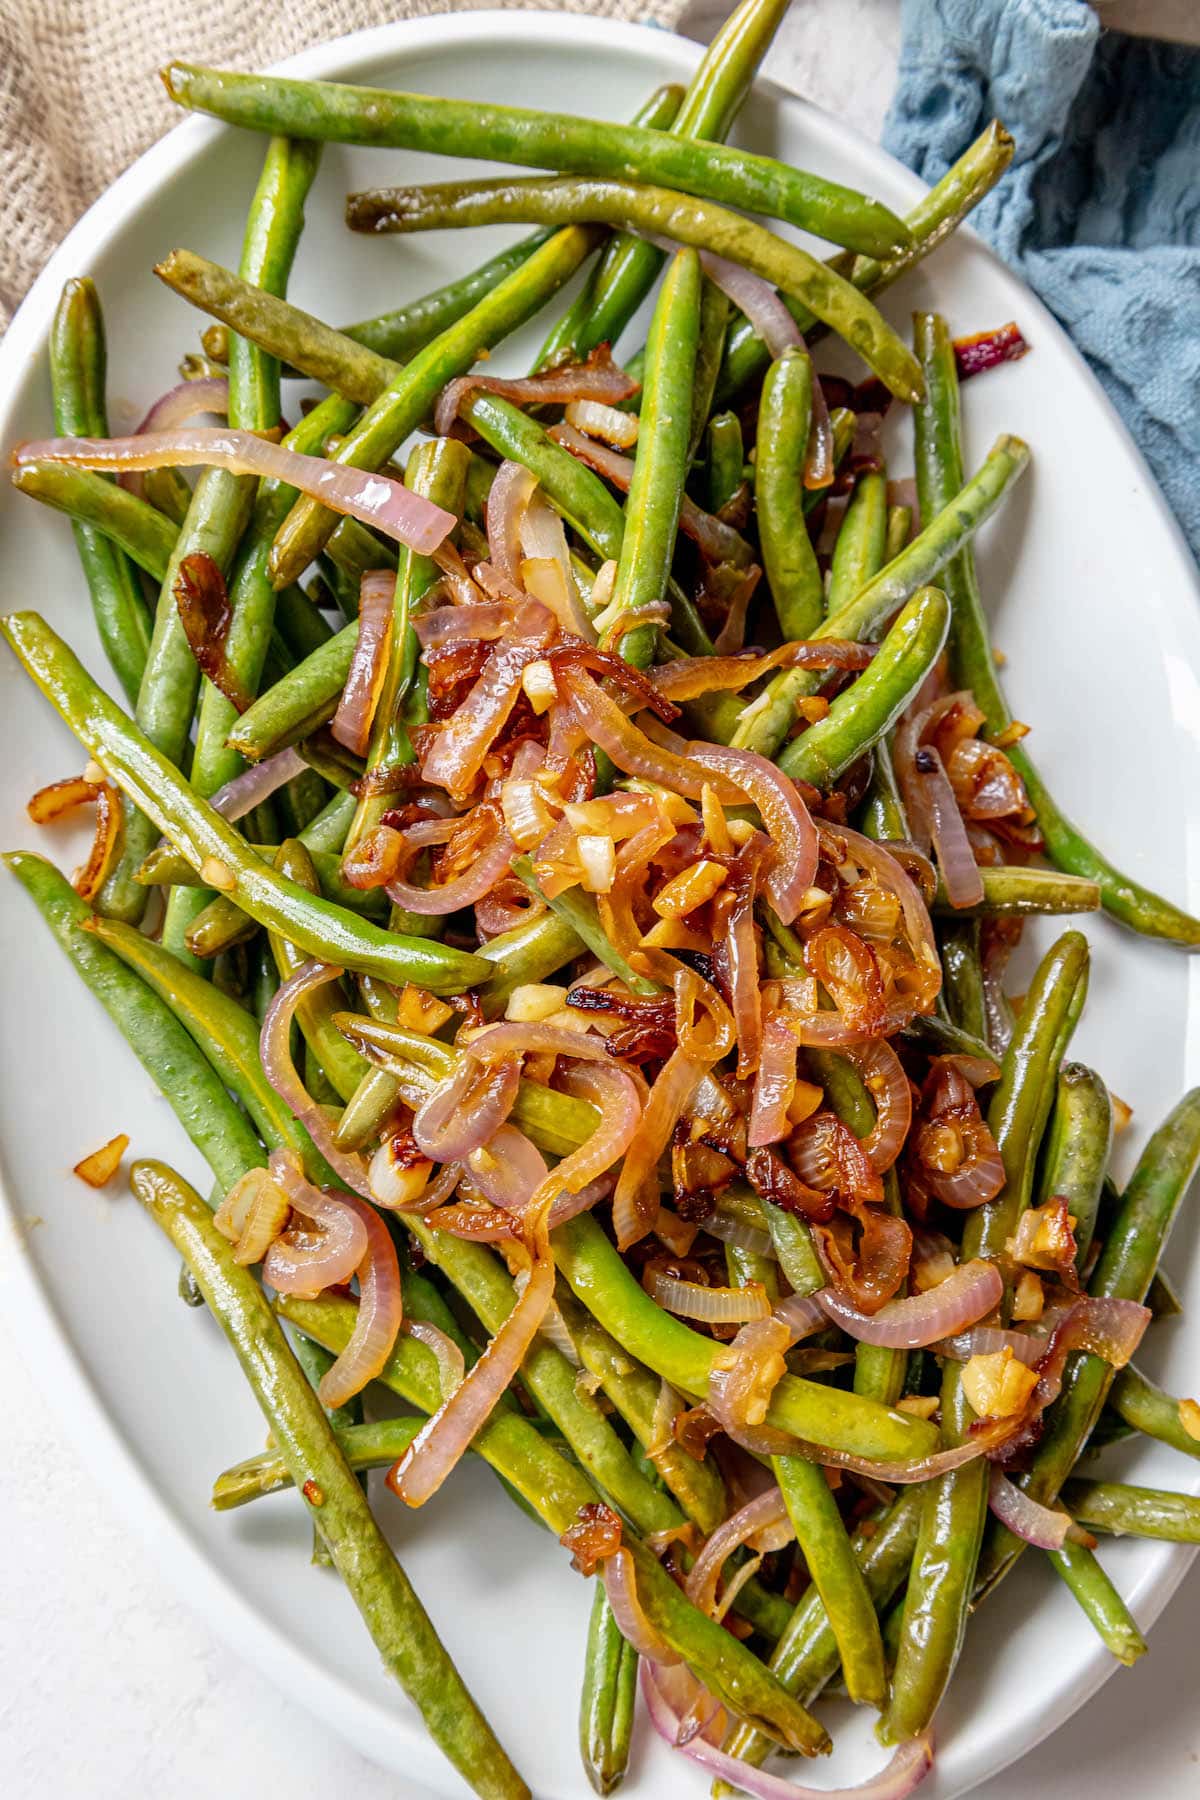 Sautéed green beans with red onion, served on a white plate.